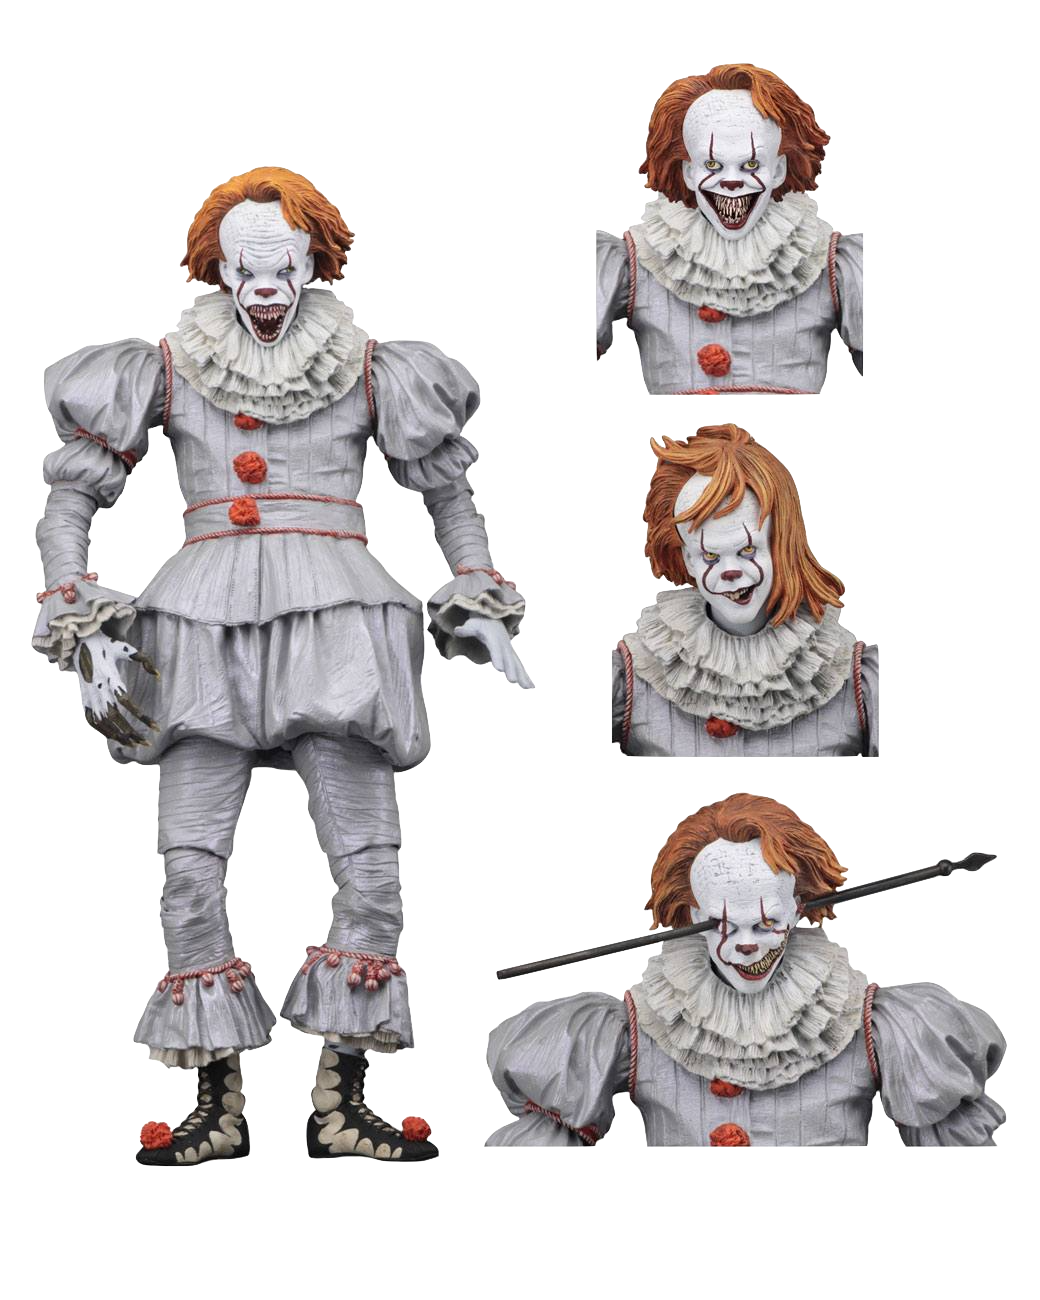 neca-2017-it-pennywise-well-house-figure-toyslife